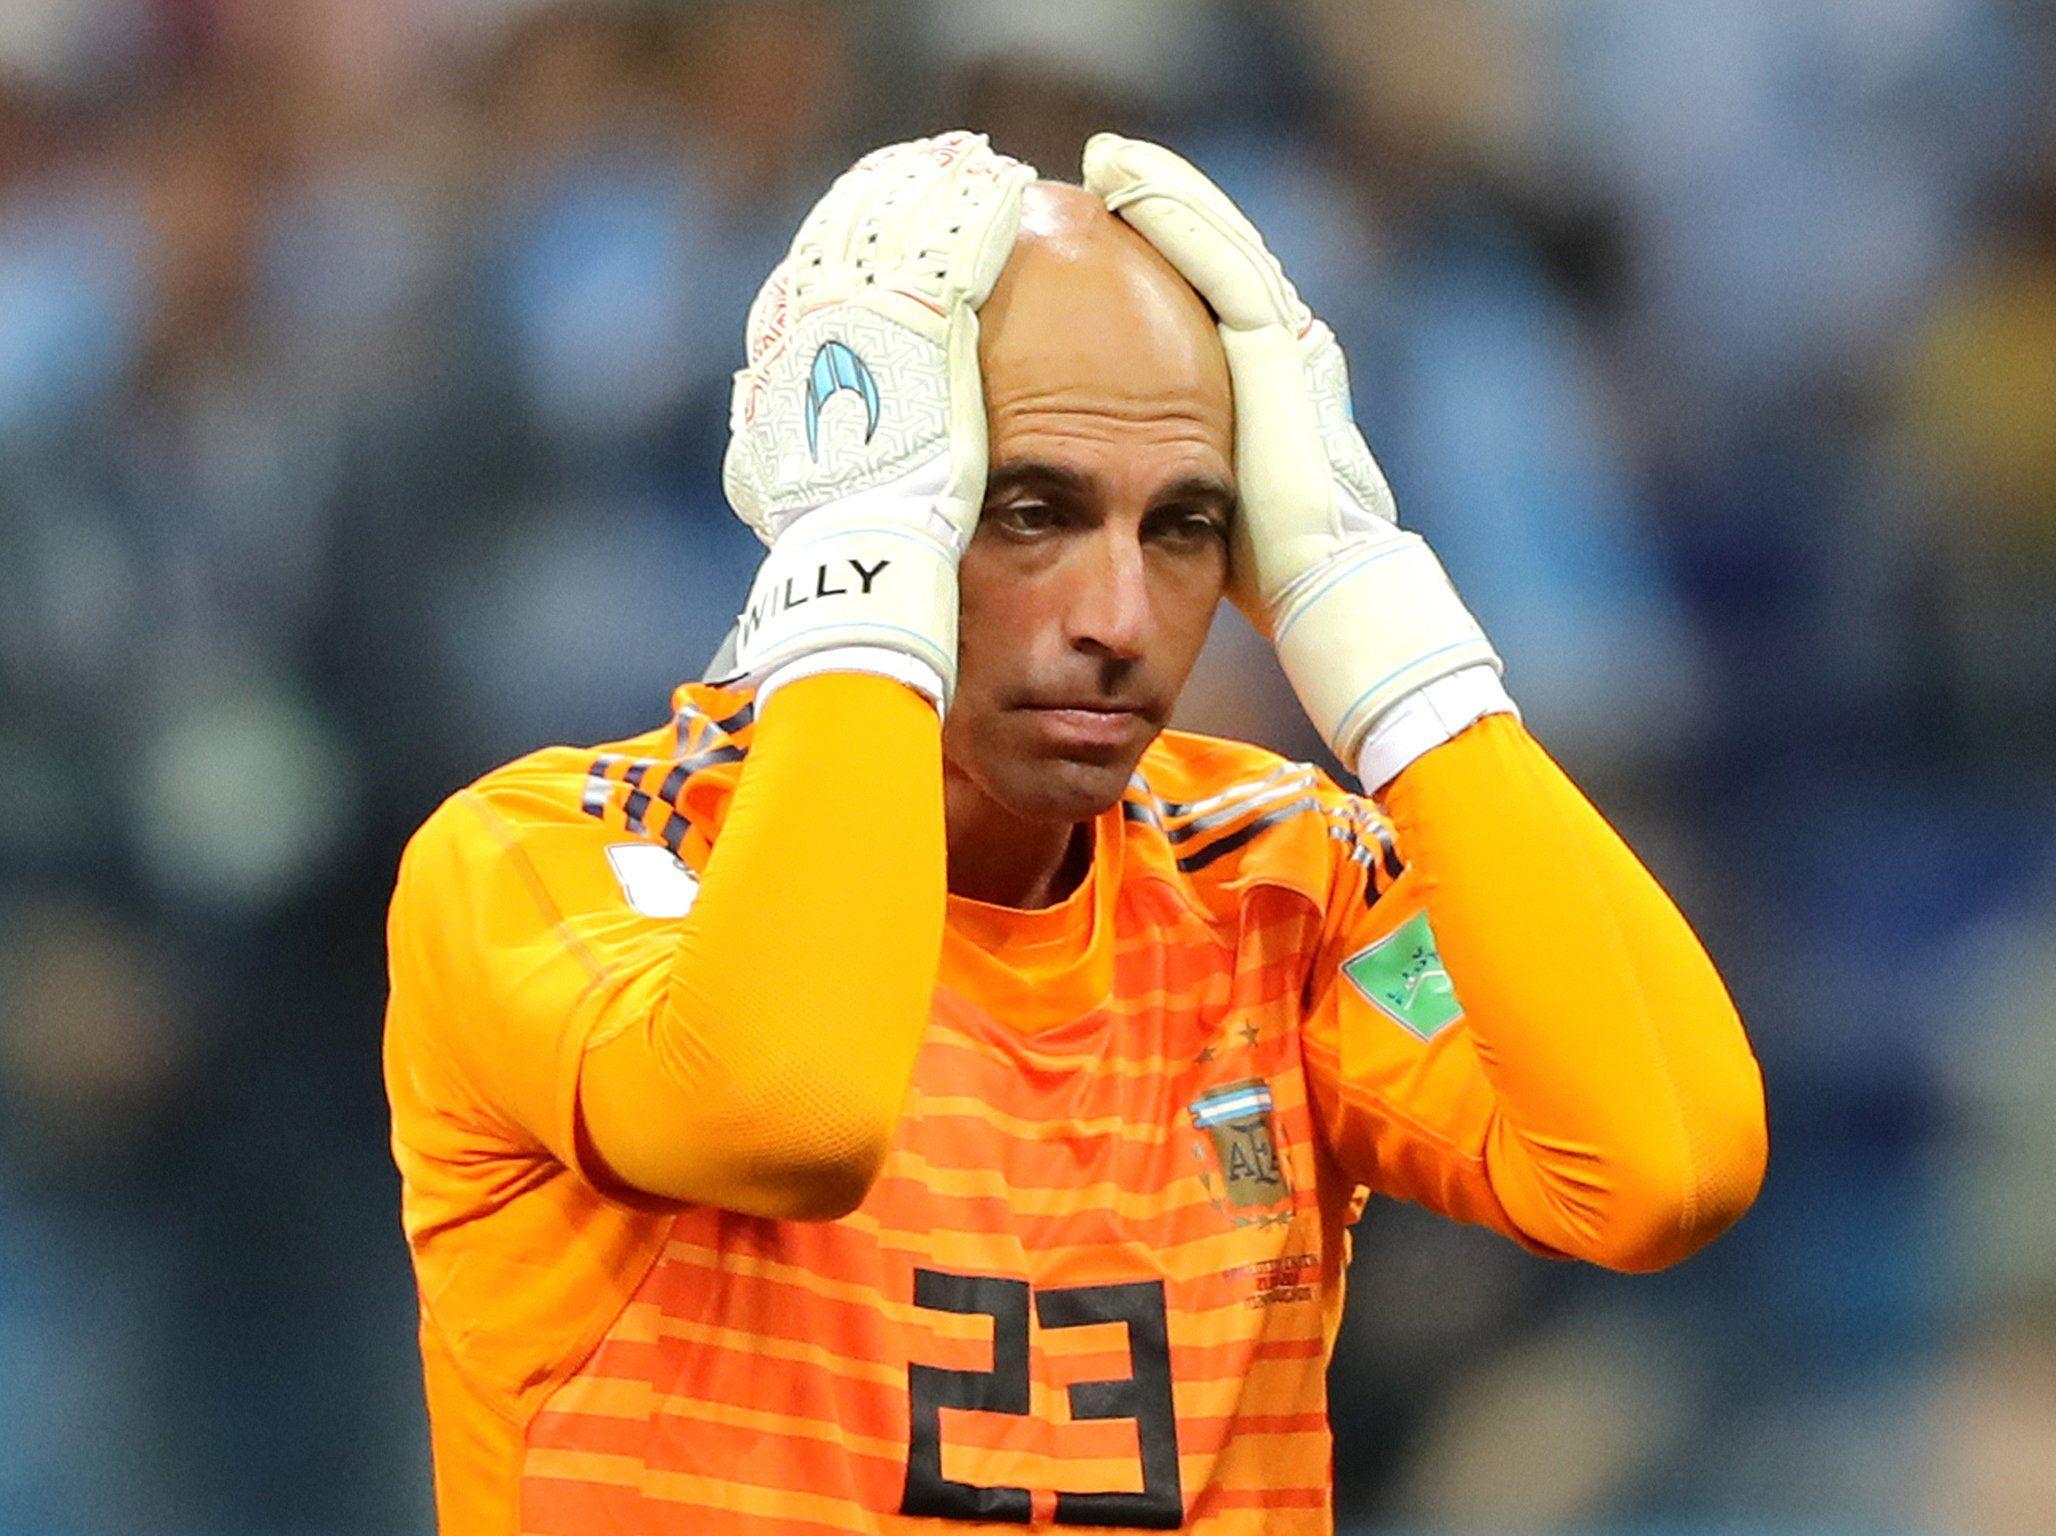 Willy Caballero news, breaking stories and comment